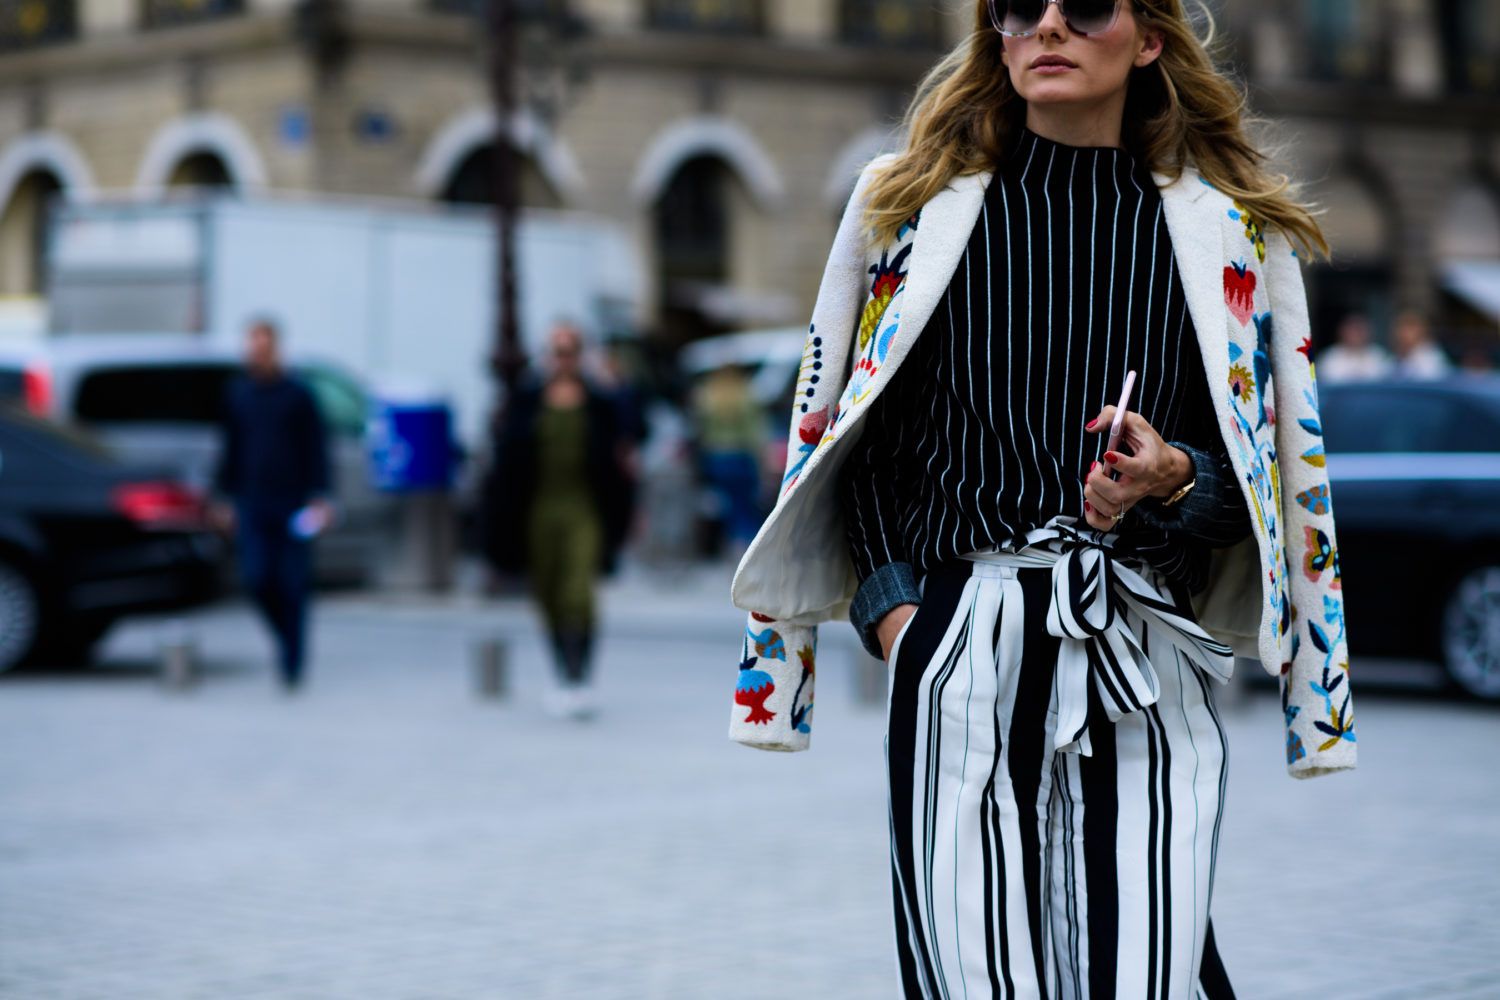 Olivia Palermo Shares Her Favorite Clothing Brand and Tips for Traveling